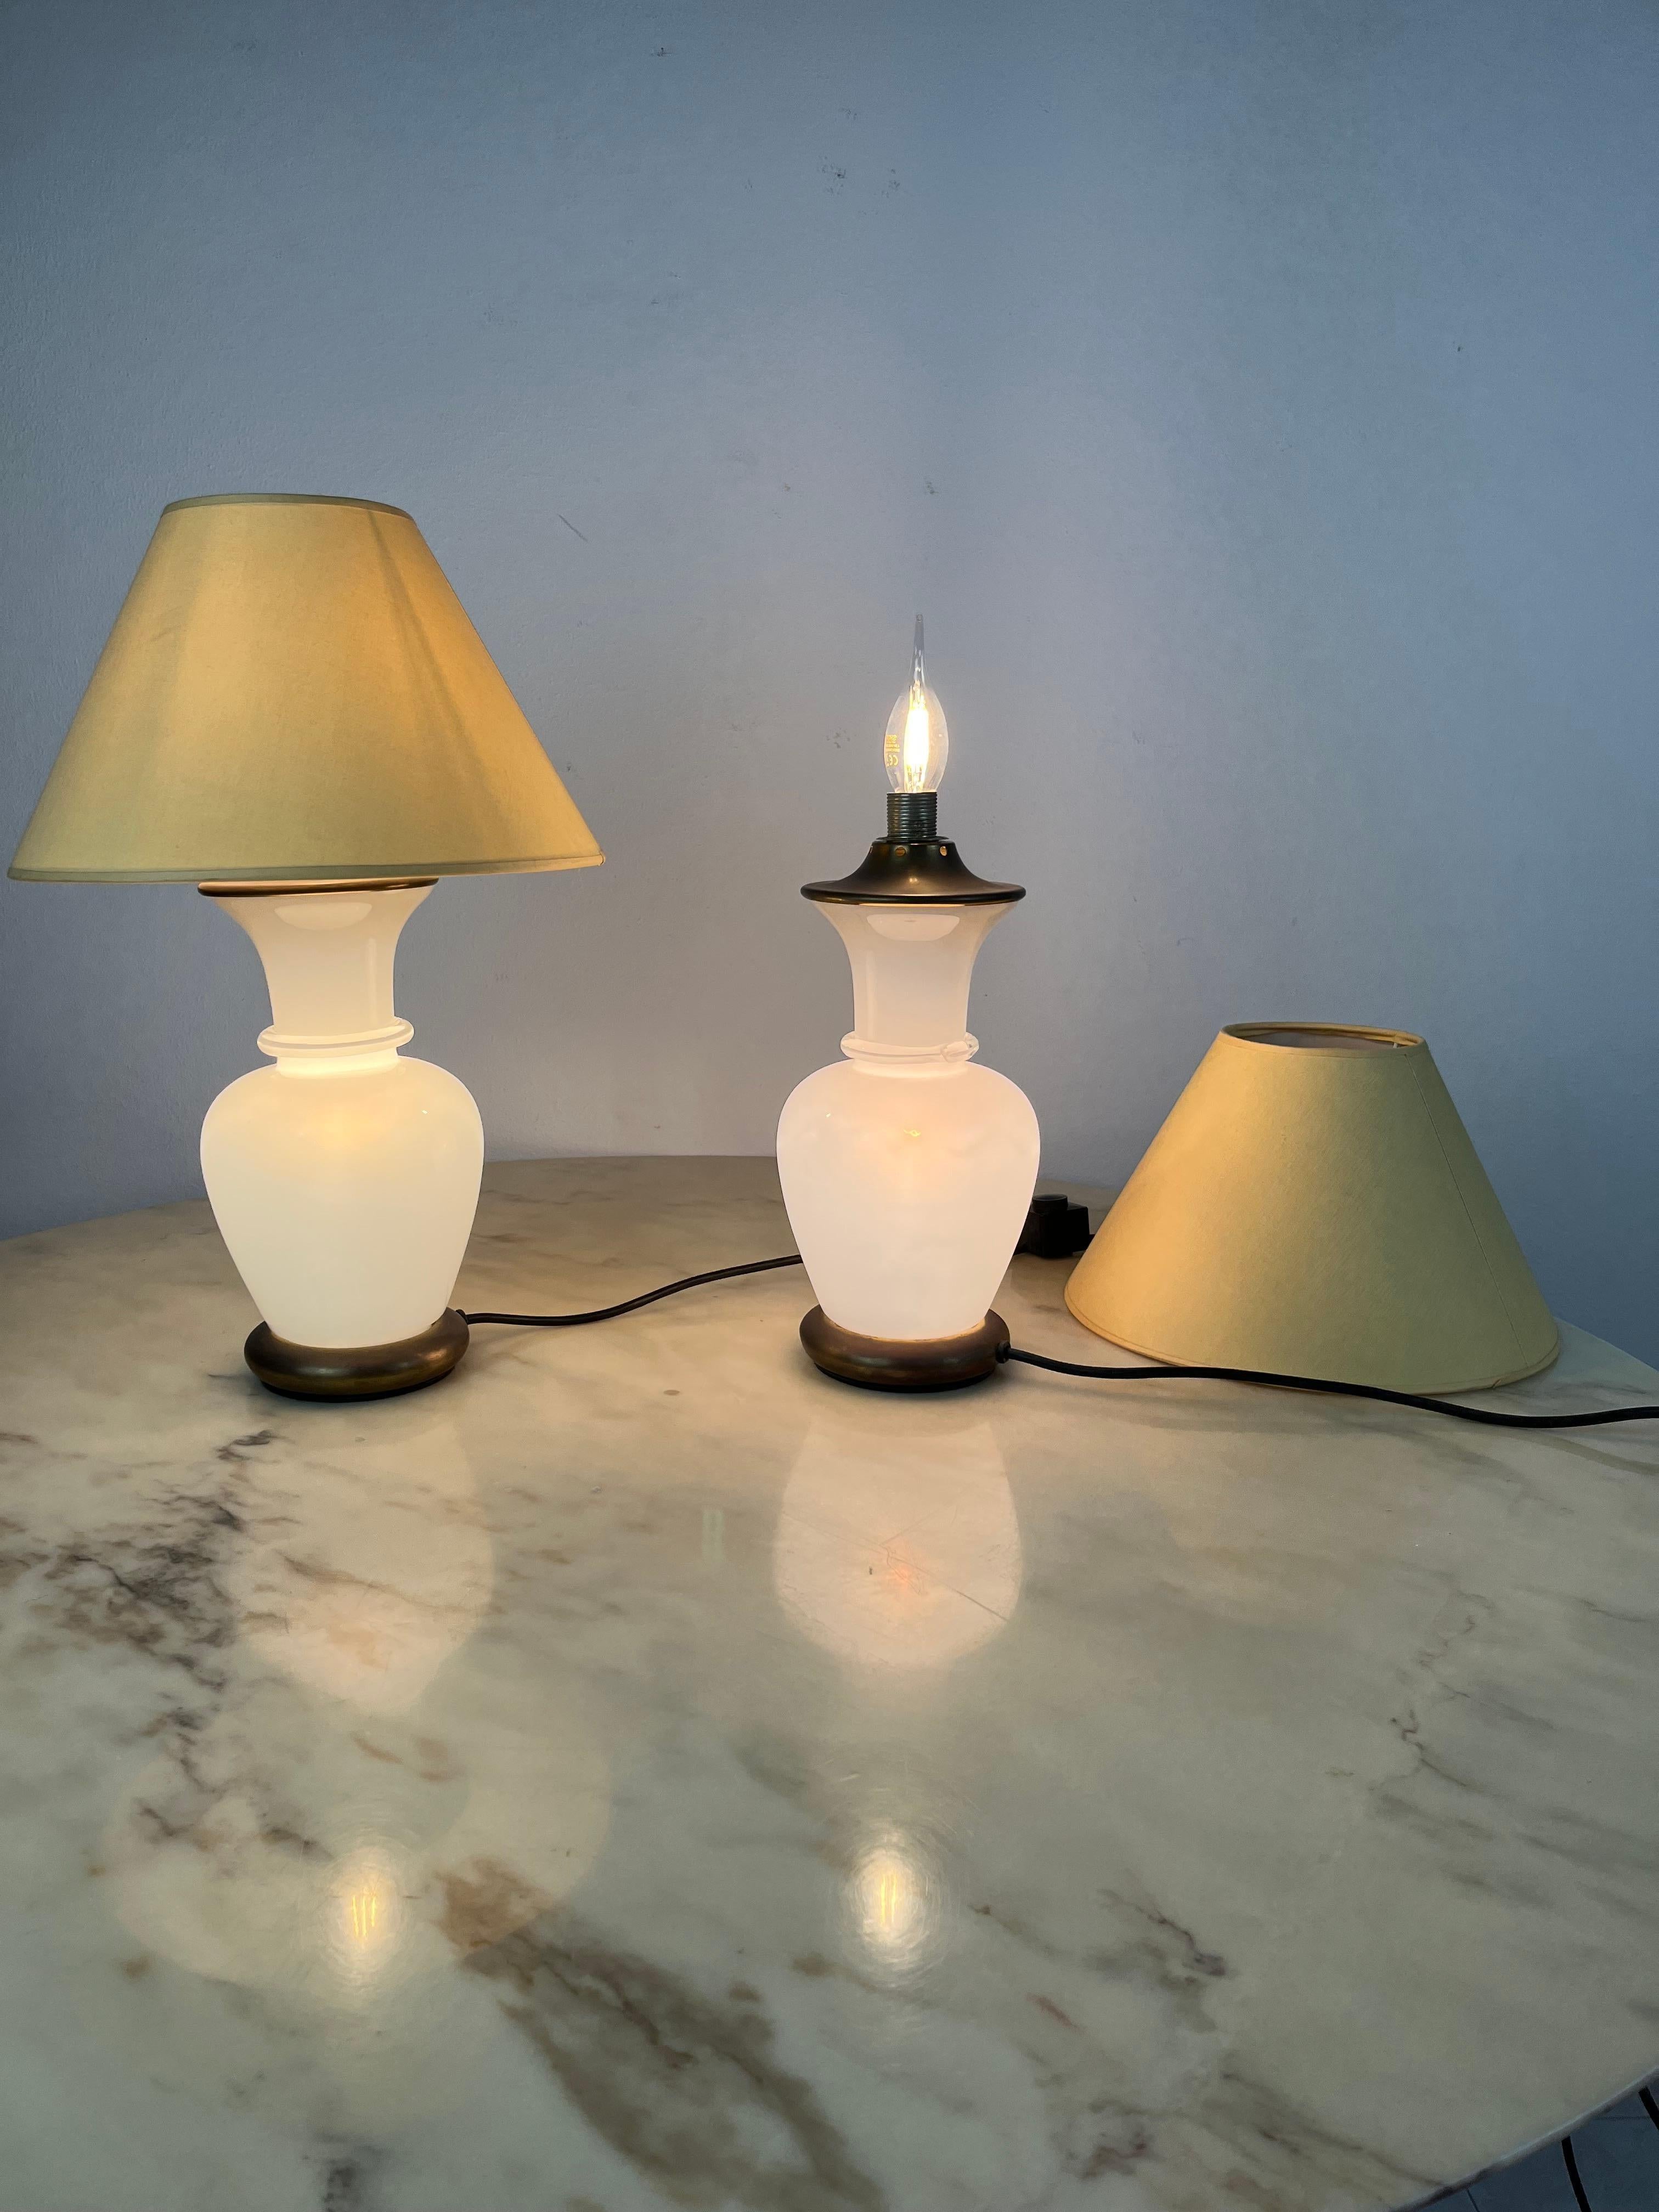 Set of 2 Murano Glass and Brass Table Lamps, F. Fabbian, Italy, 1970s For Sale 1